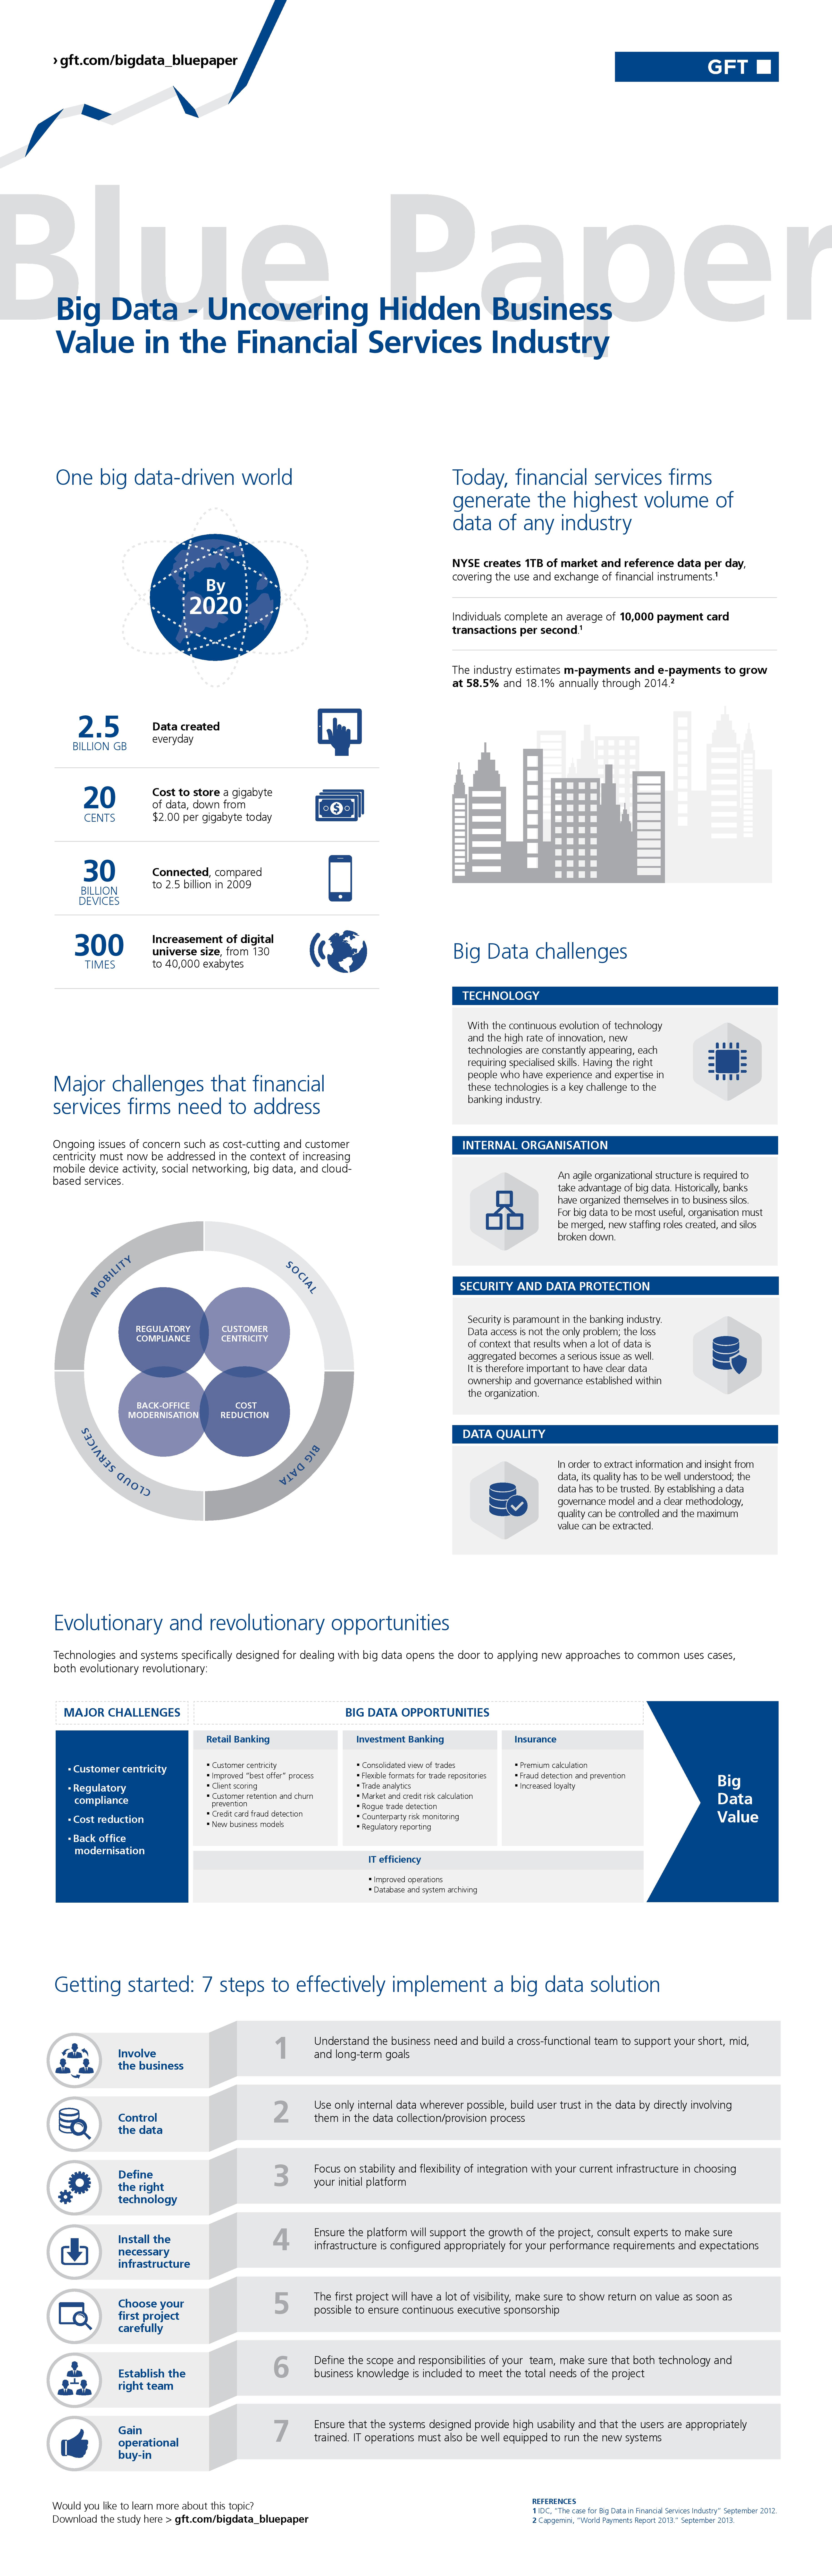 Infographic "Big Data - Uncovering Hidden Business Value in the Financial Services Industry"